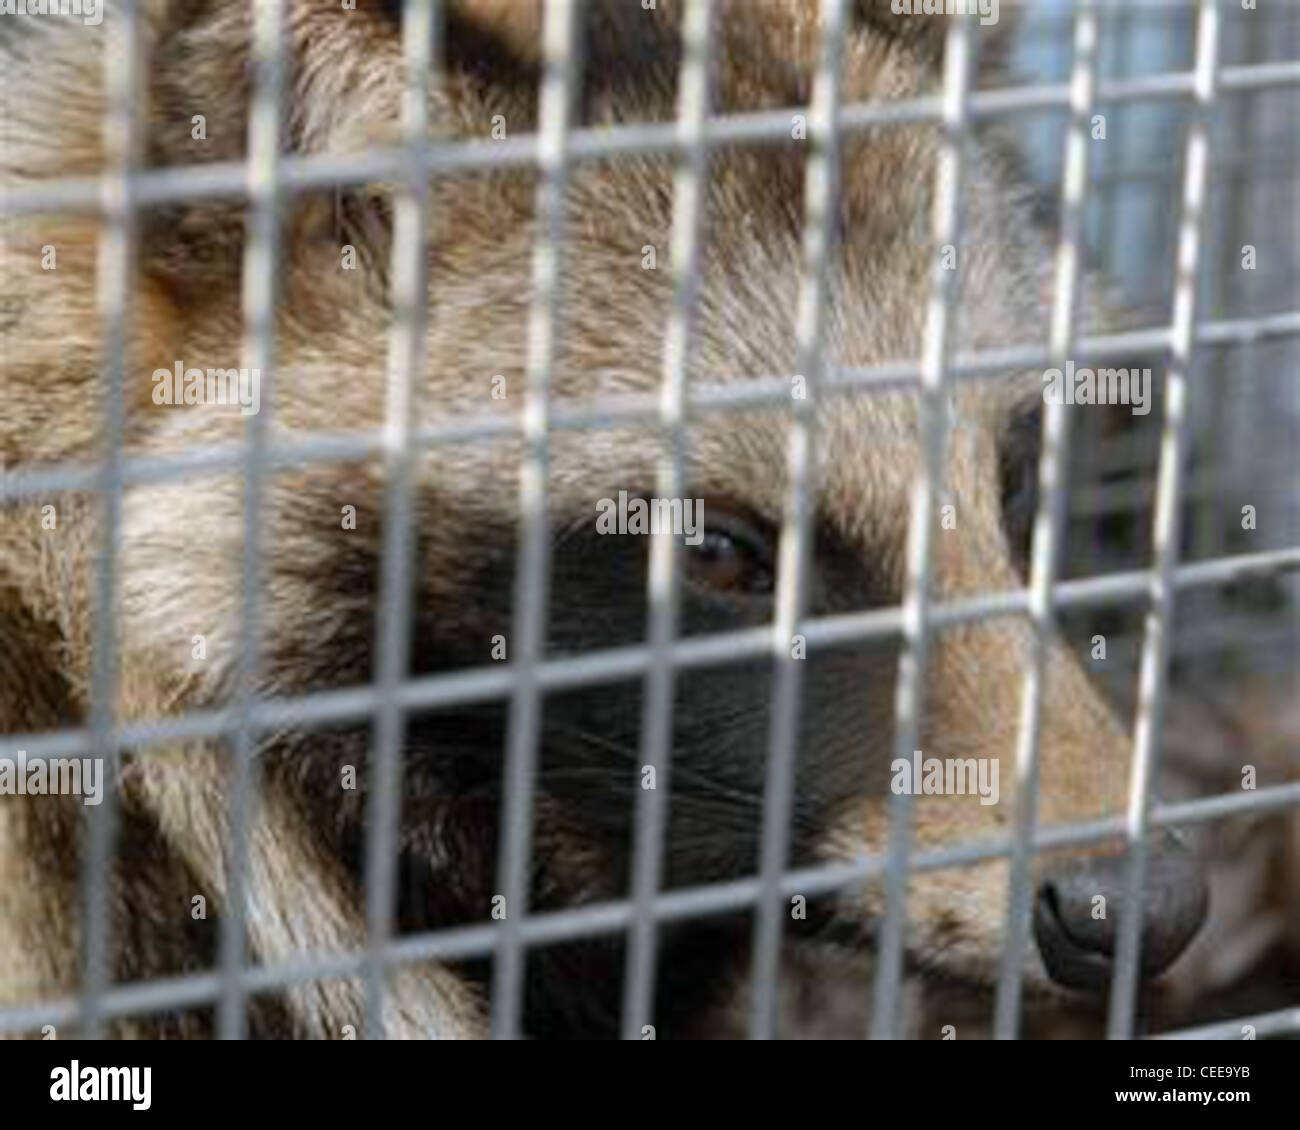 This raccoon dog was captured Jan. 6 and released Jan. 8 in a forest at the Tama Hills Recreation Area on Yokota Air Base, Japan. The 374th Civil Engineer Squadron pest management office catches and relocates wild animals found on the base, keeping the airfield clear and the pet population safe. Stock Photo